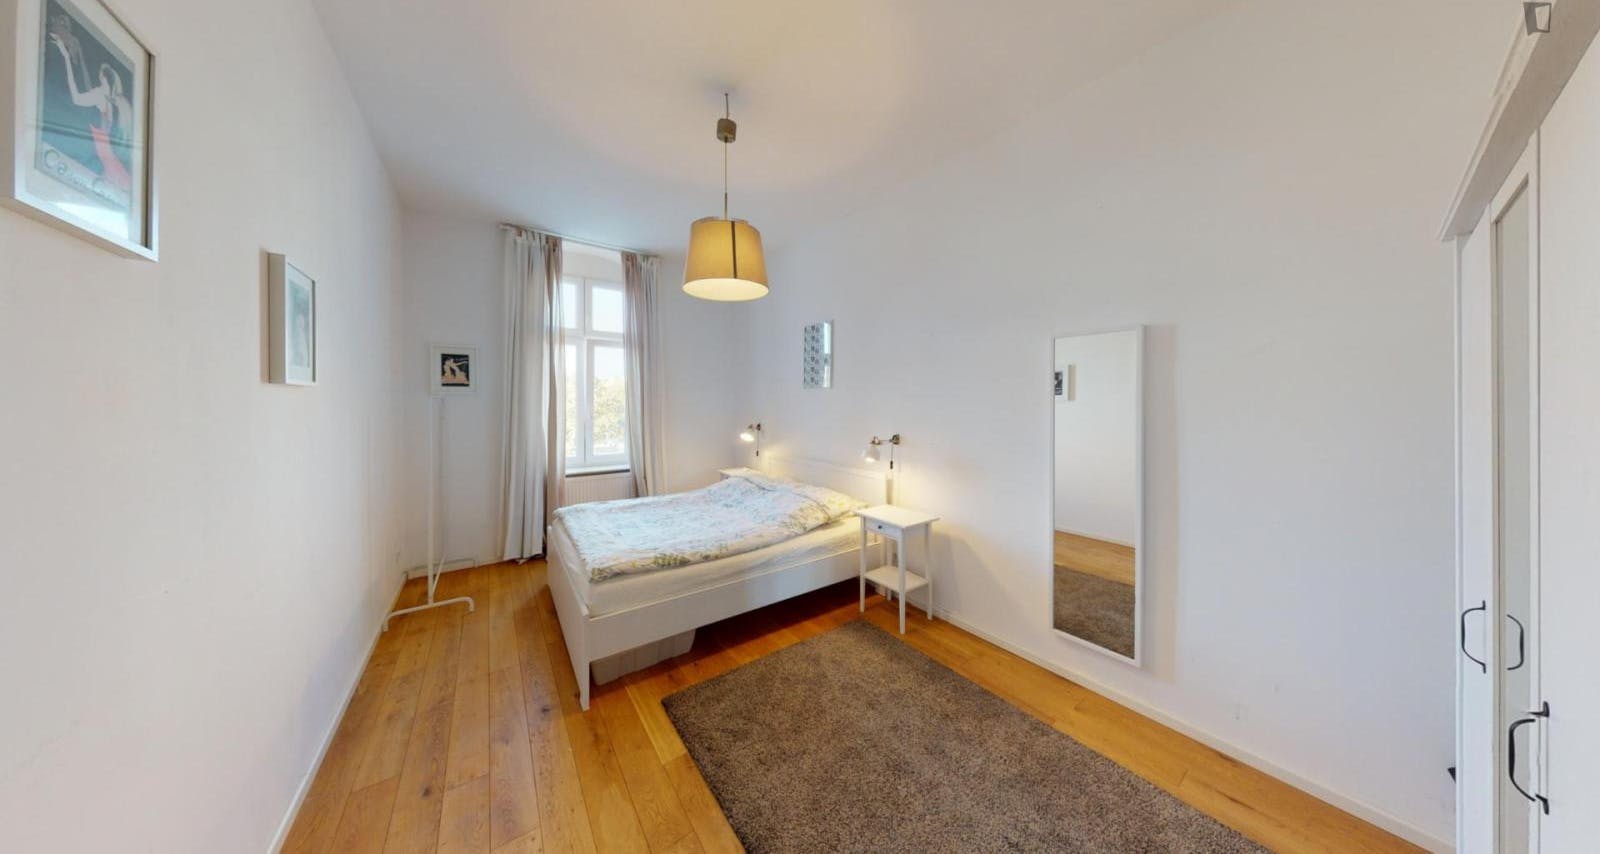 Lovely 1-Bedroom apartment with balcony close to Landsberger Allee train station